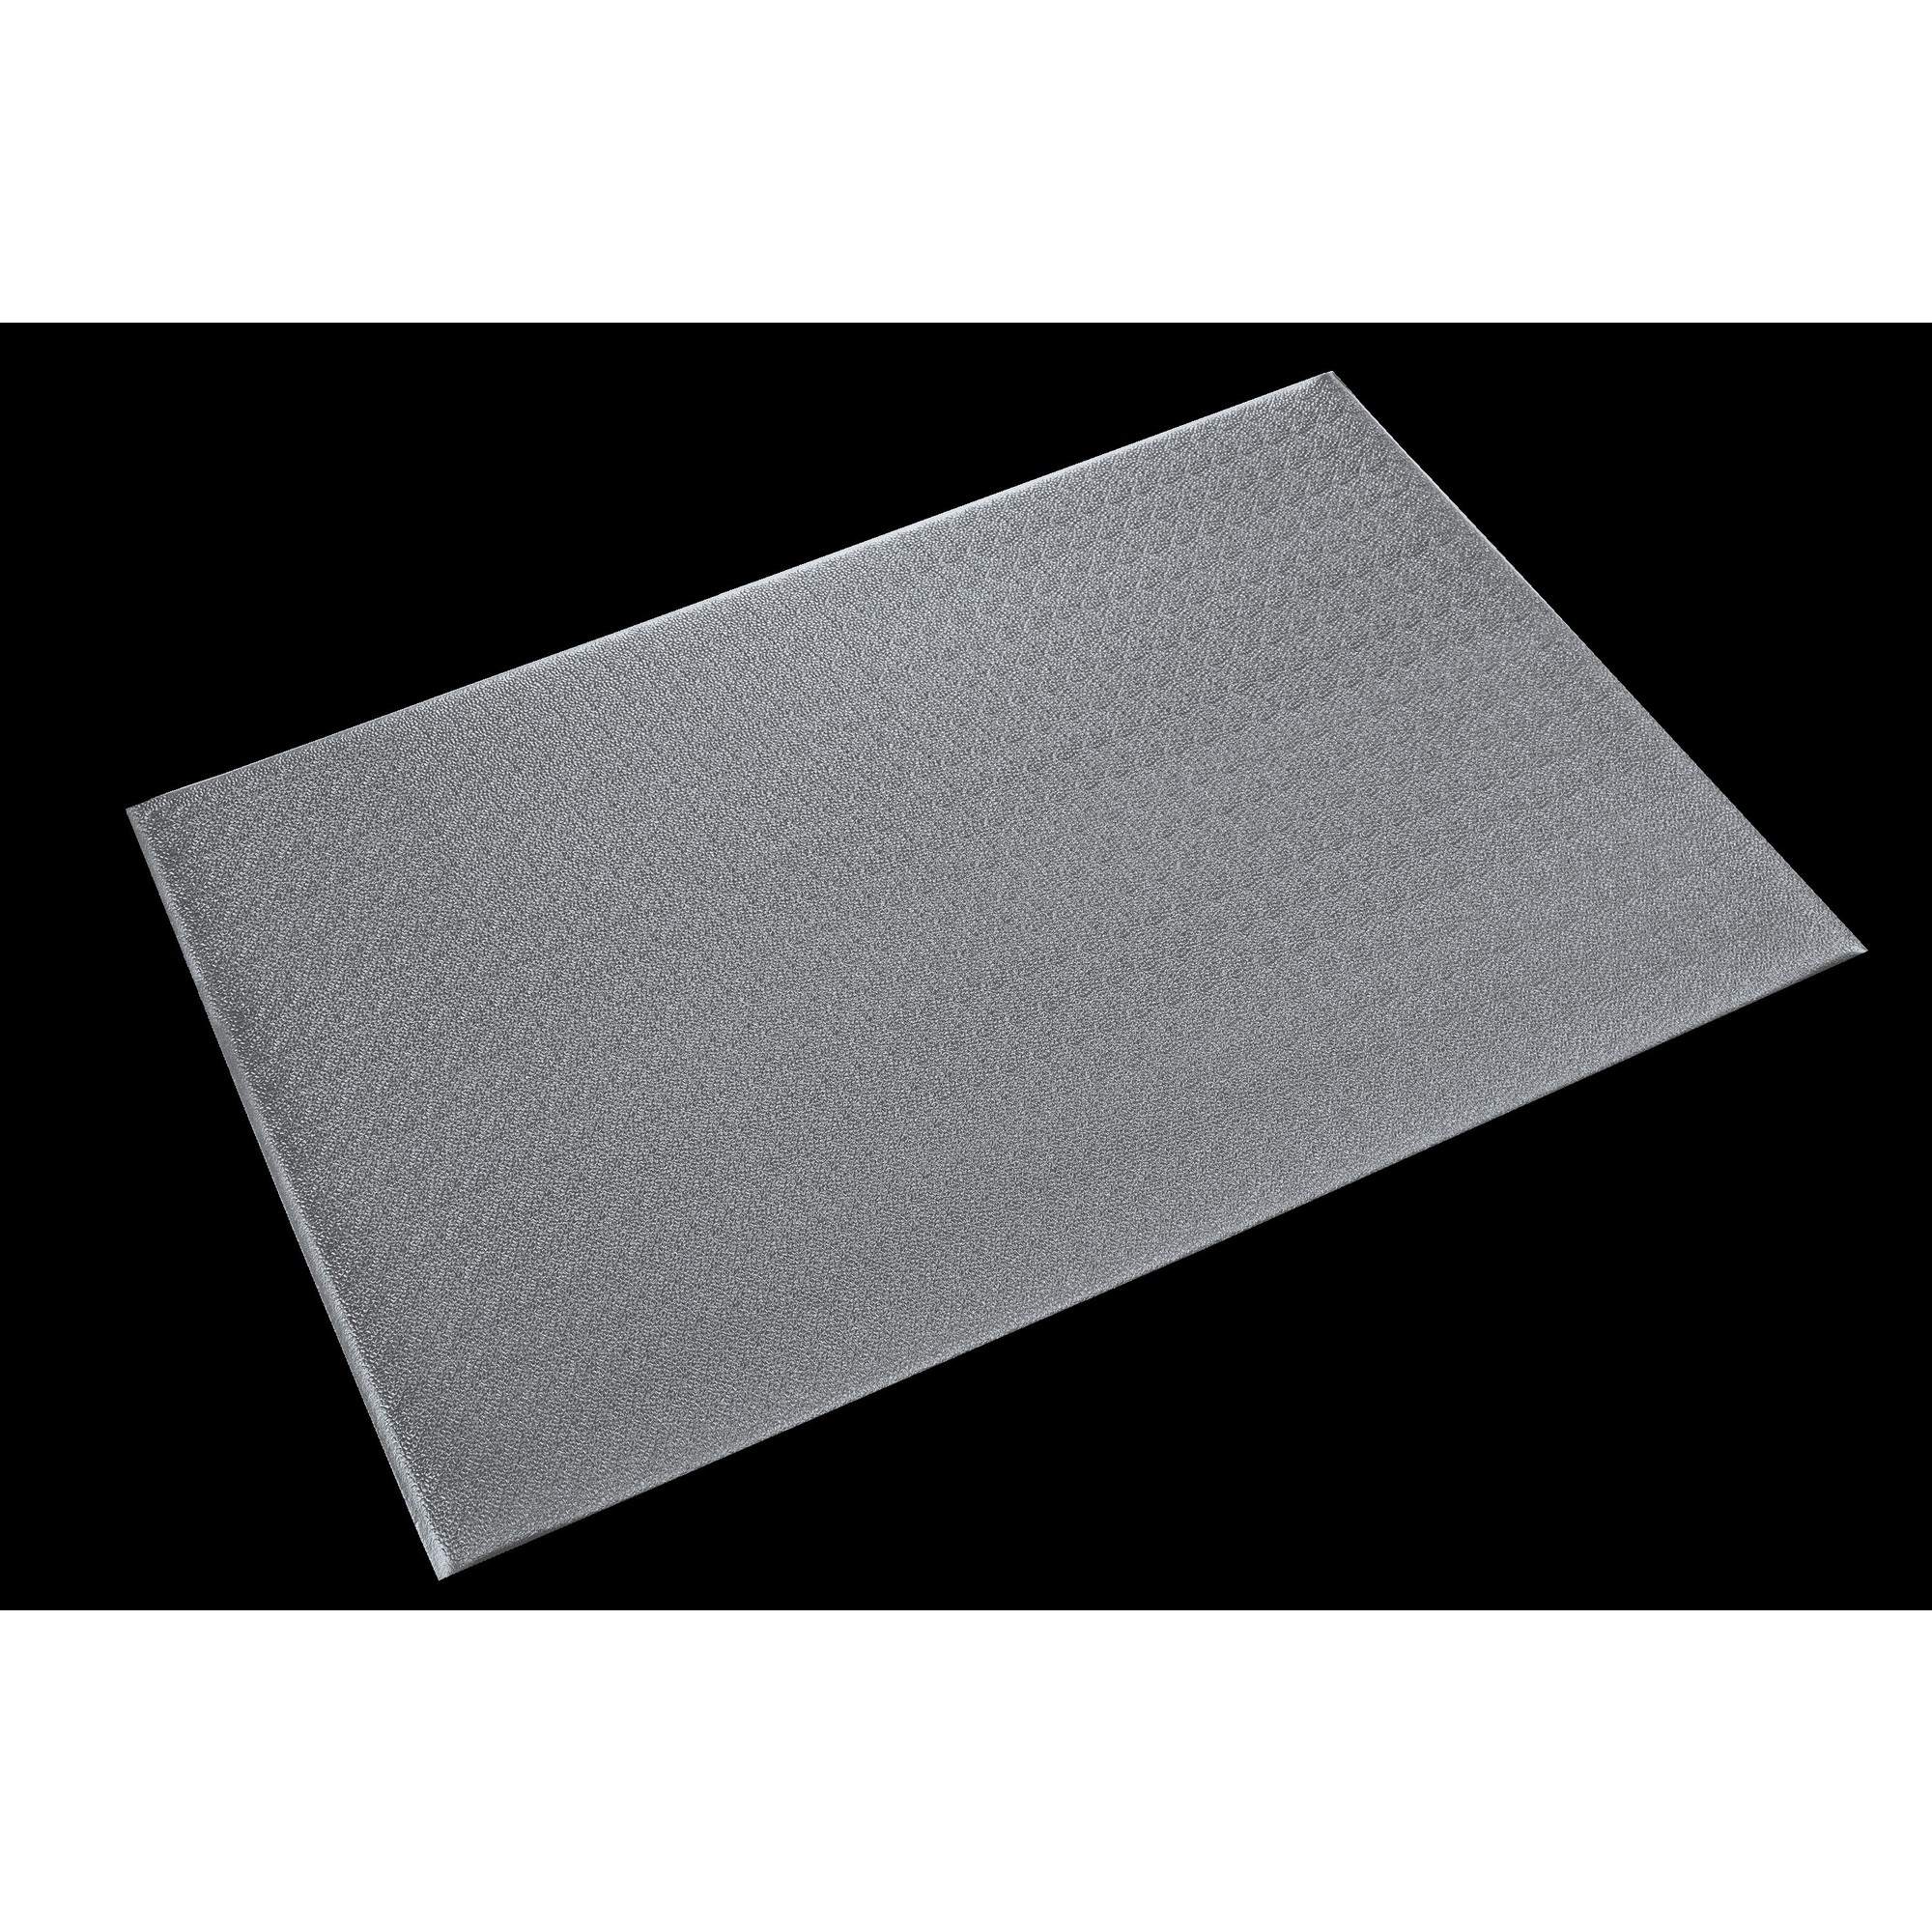 Crown Matting Technologies, Comfort-King 1/2 3ft.x12ft. Steel Gray, Width 36 in, Length 144 in, Thickness 1/2 in, Model K4 0312GY